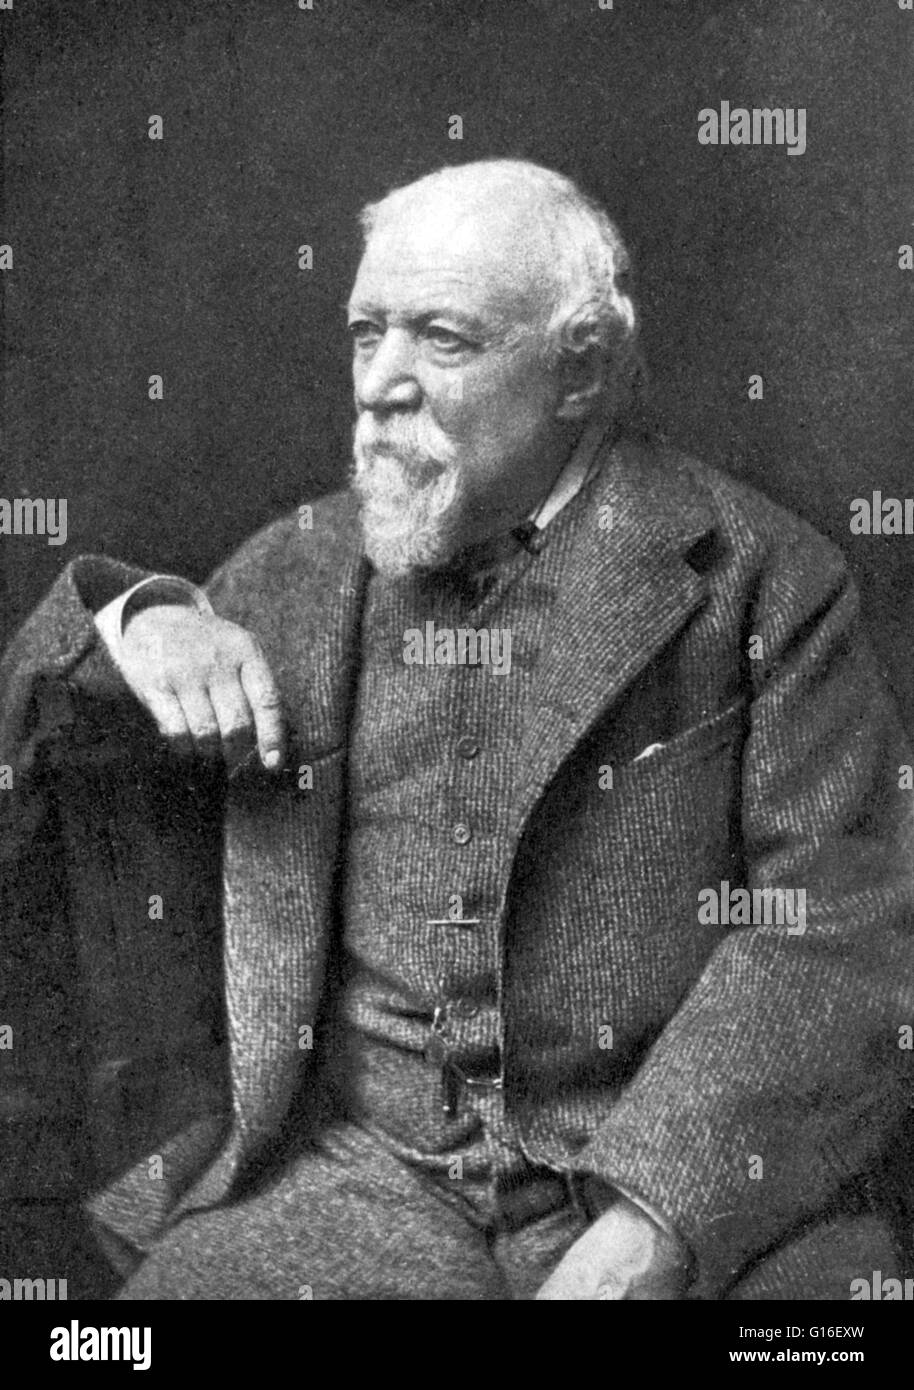 Robert Browning (May 7, 1812 - December 12, 1889) was an English poet and playwright whose mastery of dramatic verse, and in particular the dramatic monologue, made him one of the foremost Victorian poets. His poems are known for their irony, dark humor, Stock Photo